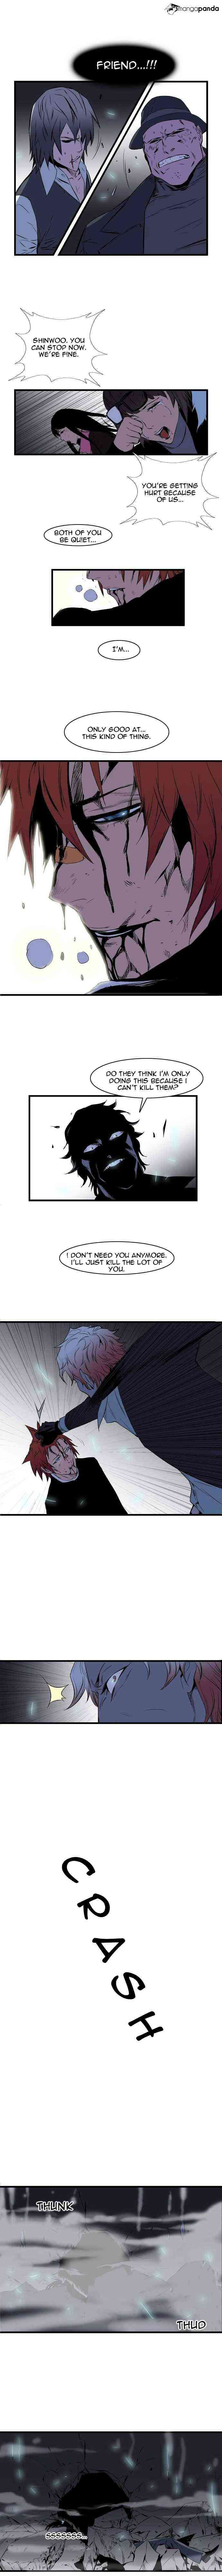 Noblesse Chapter 70 page 5